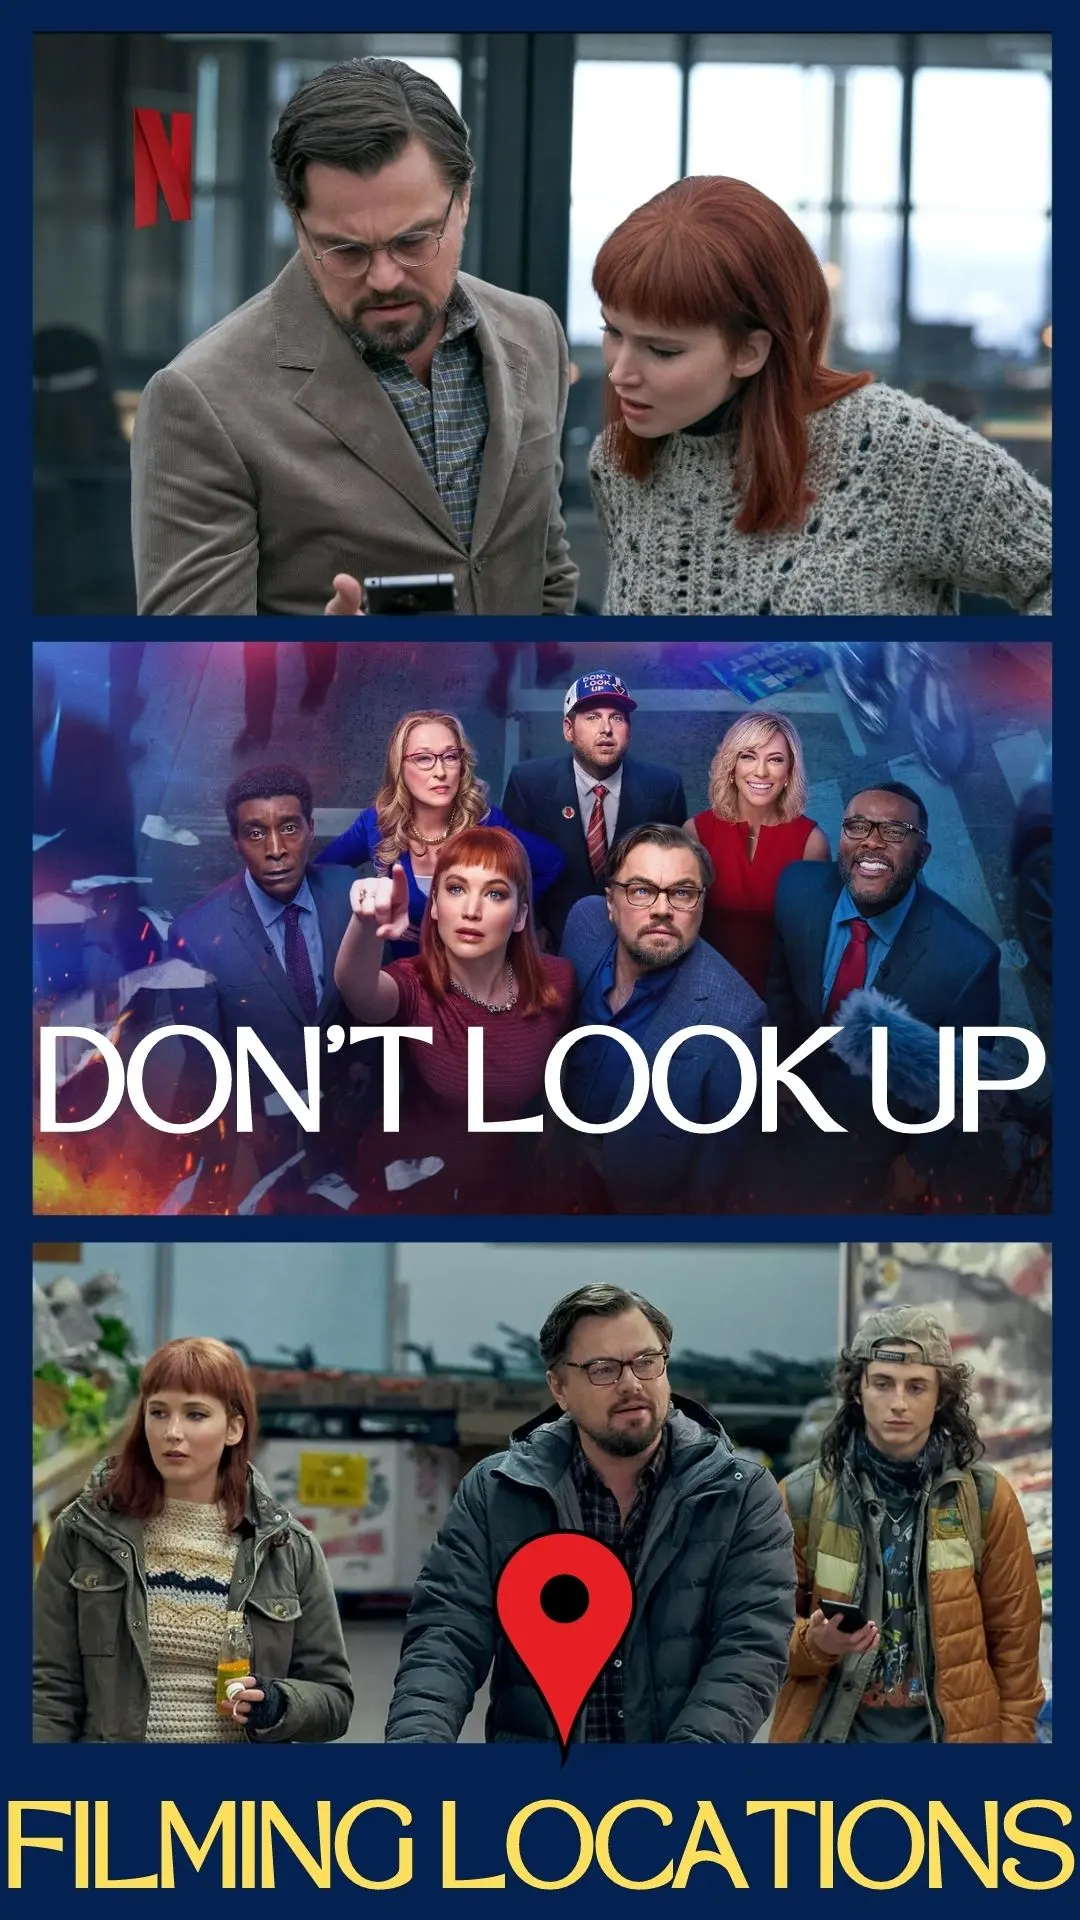 Don't Look Up Filming Locations